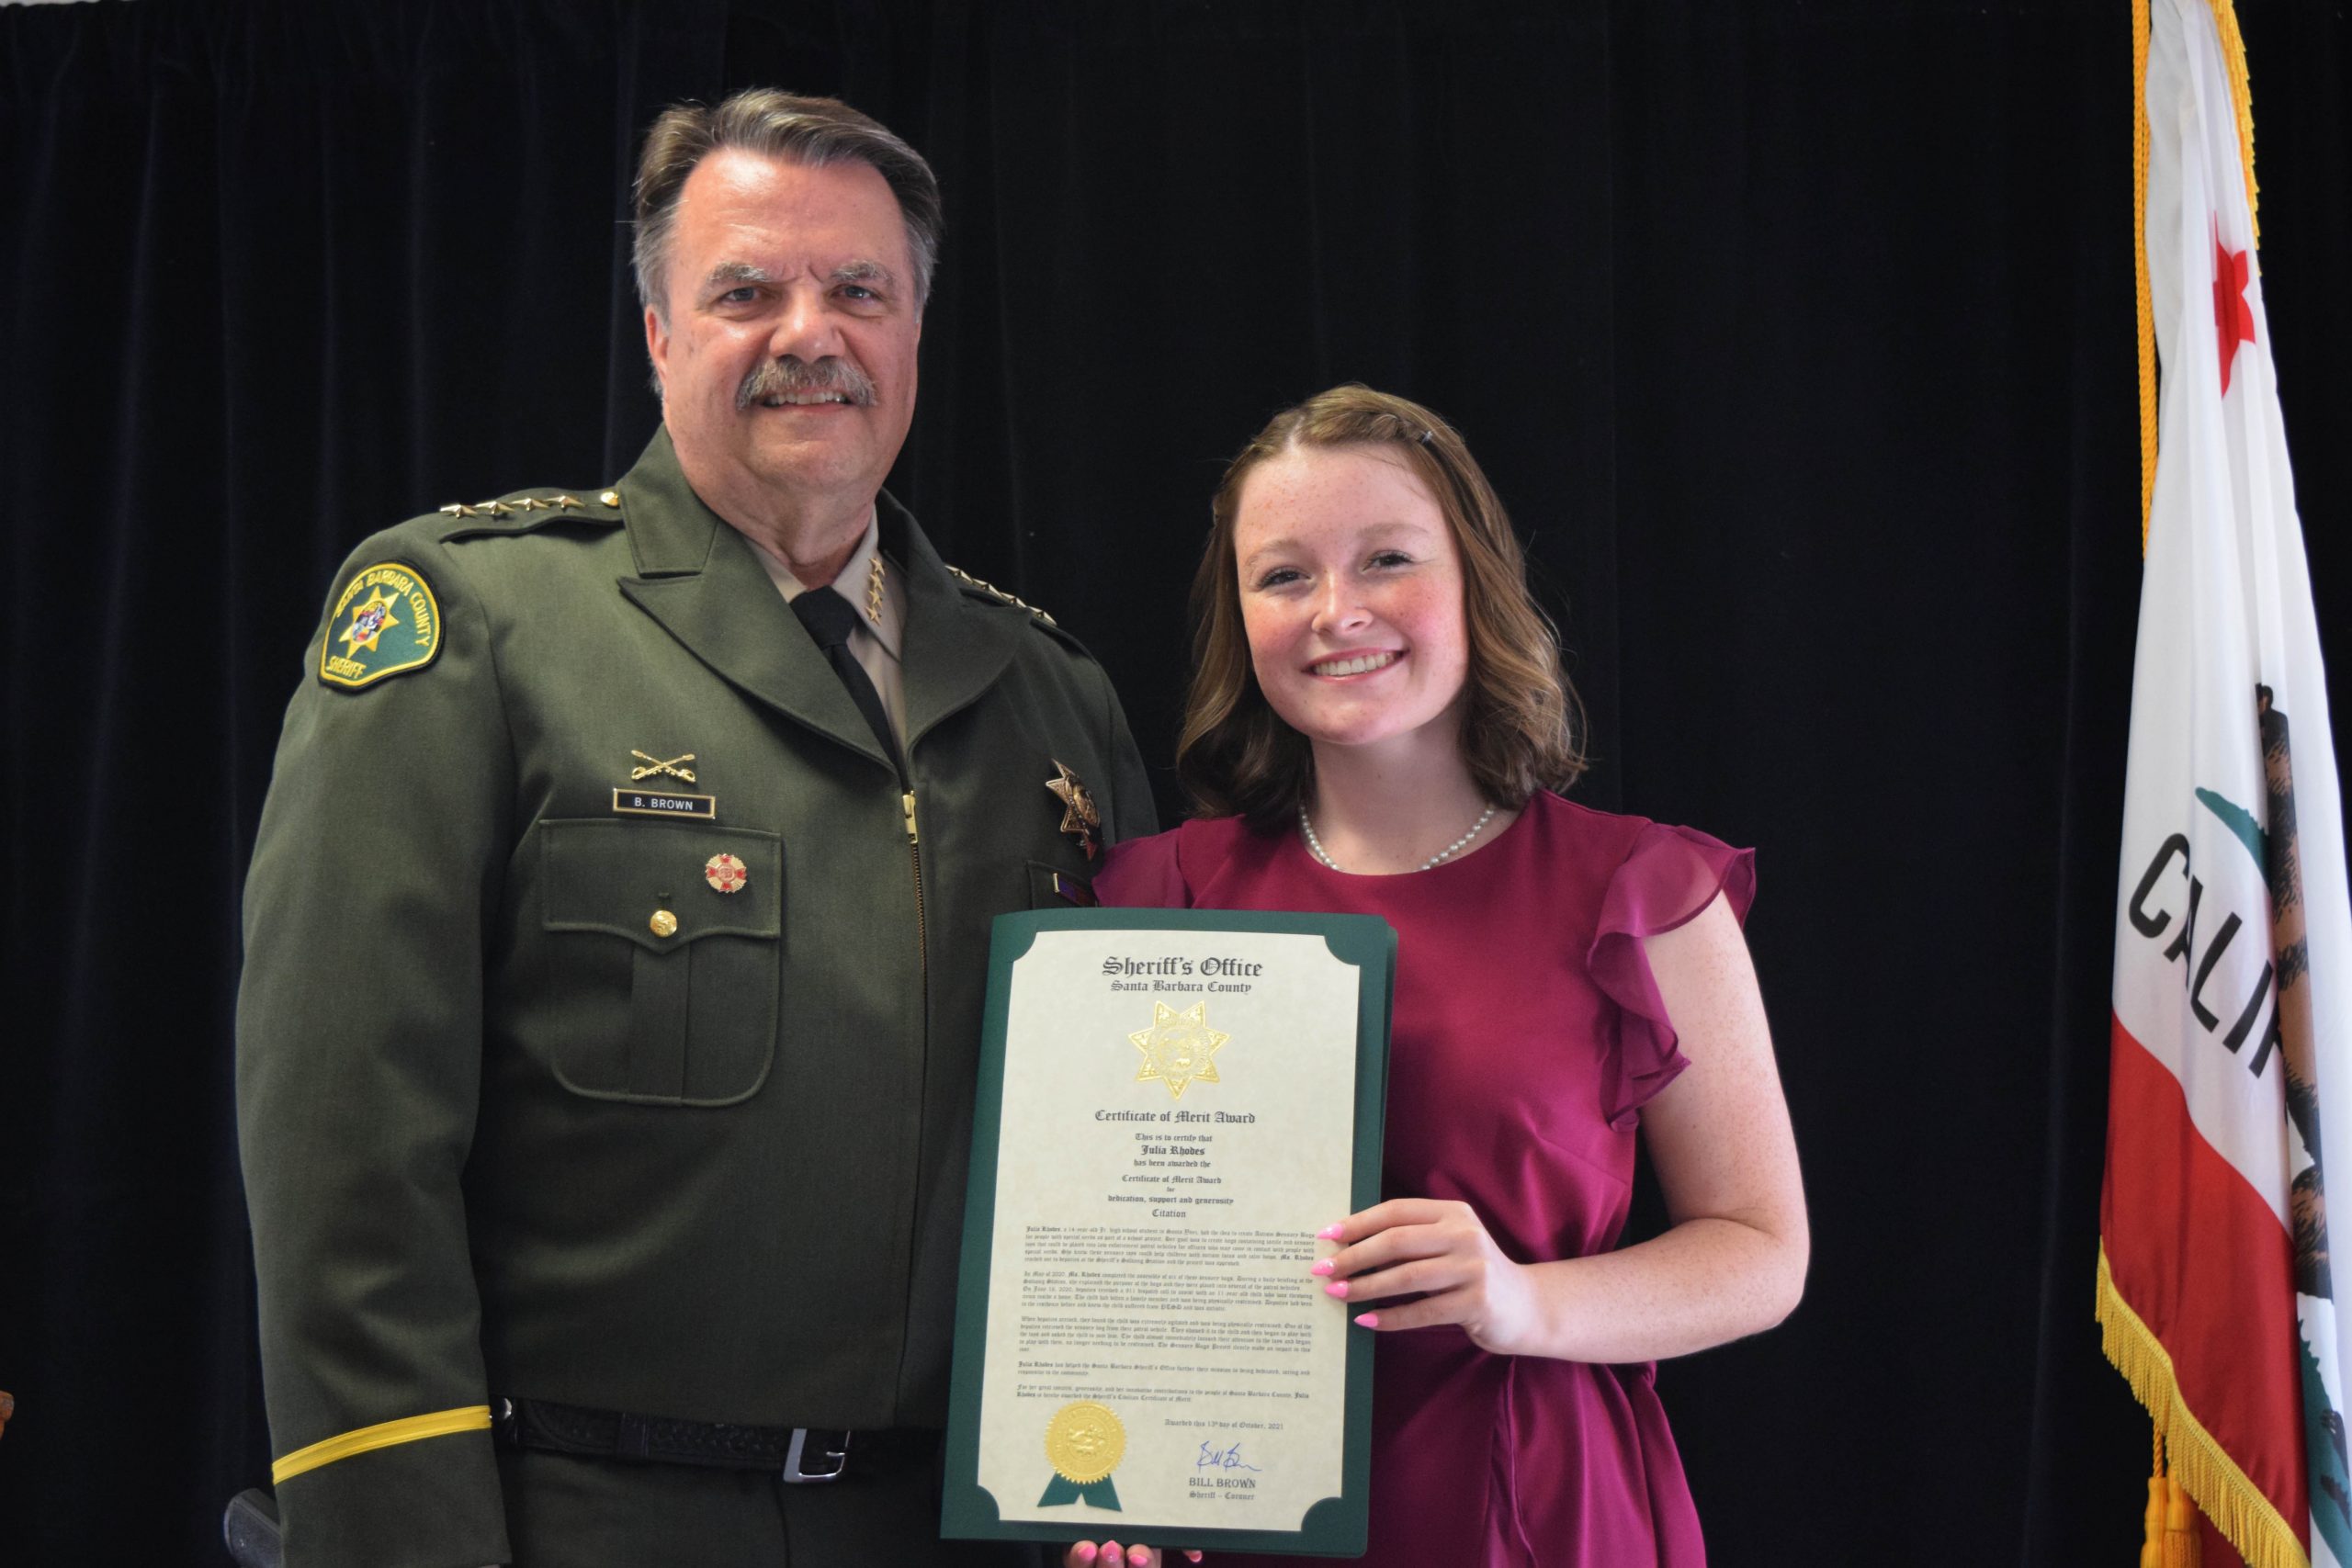 Sheriff’s Office honors exemplary performance in 2020